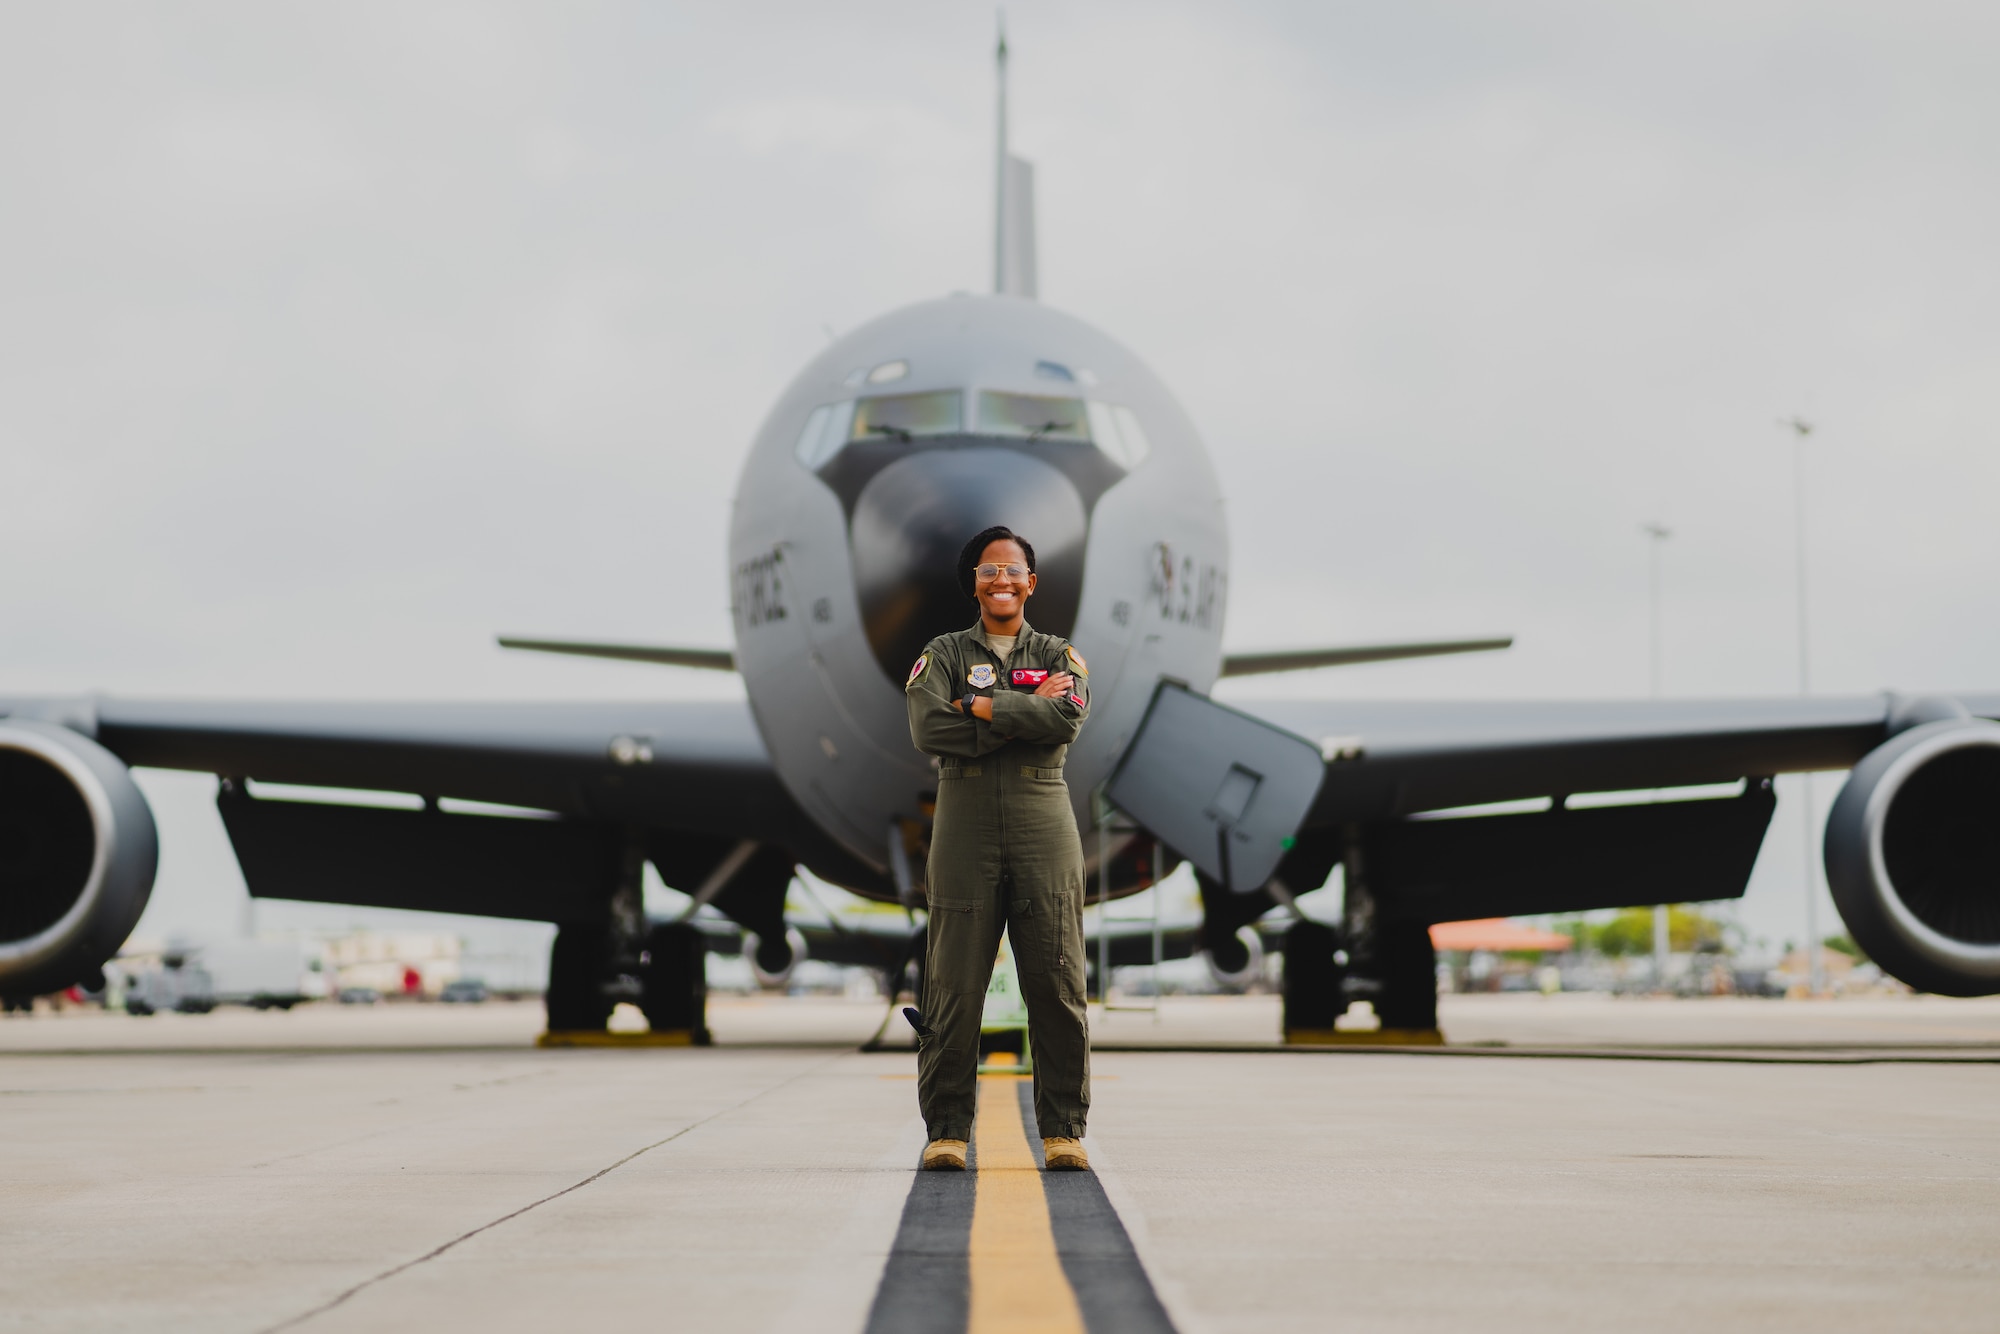 U.S. Air Force Capt. Orchydia Sackey, 50th Air Refueling Squadron pilot, stands in front of a KC-135 Stratotanker aircraft at MacDill Air Force Base, Florida, March 7, 2023.